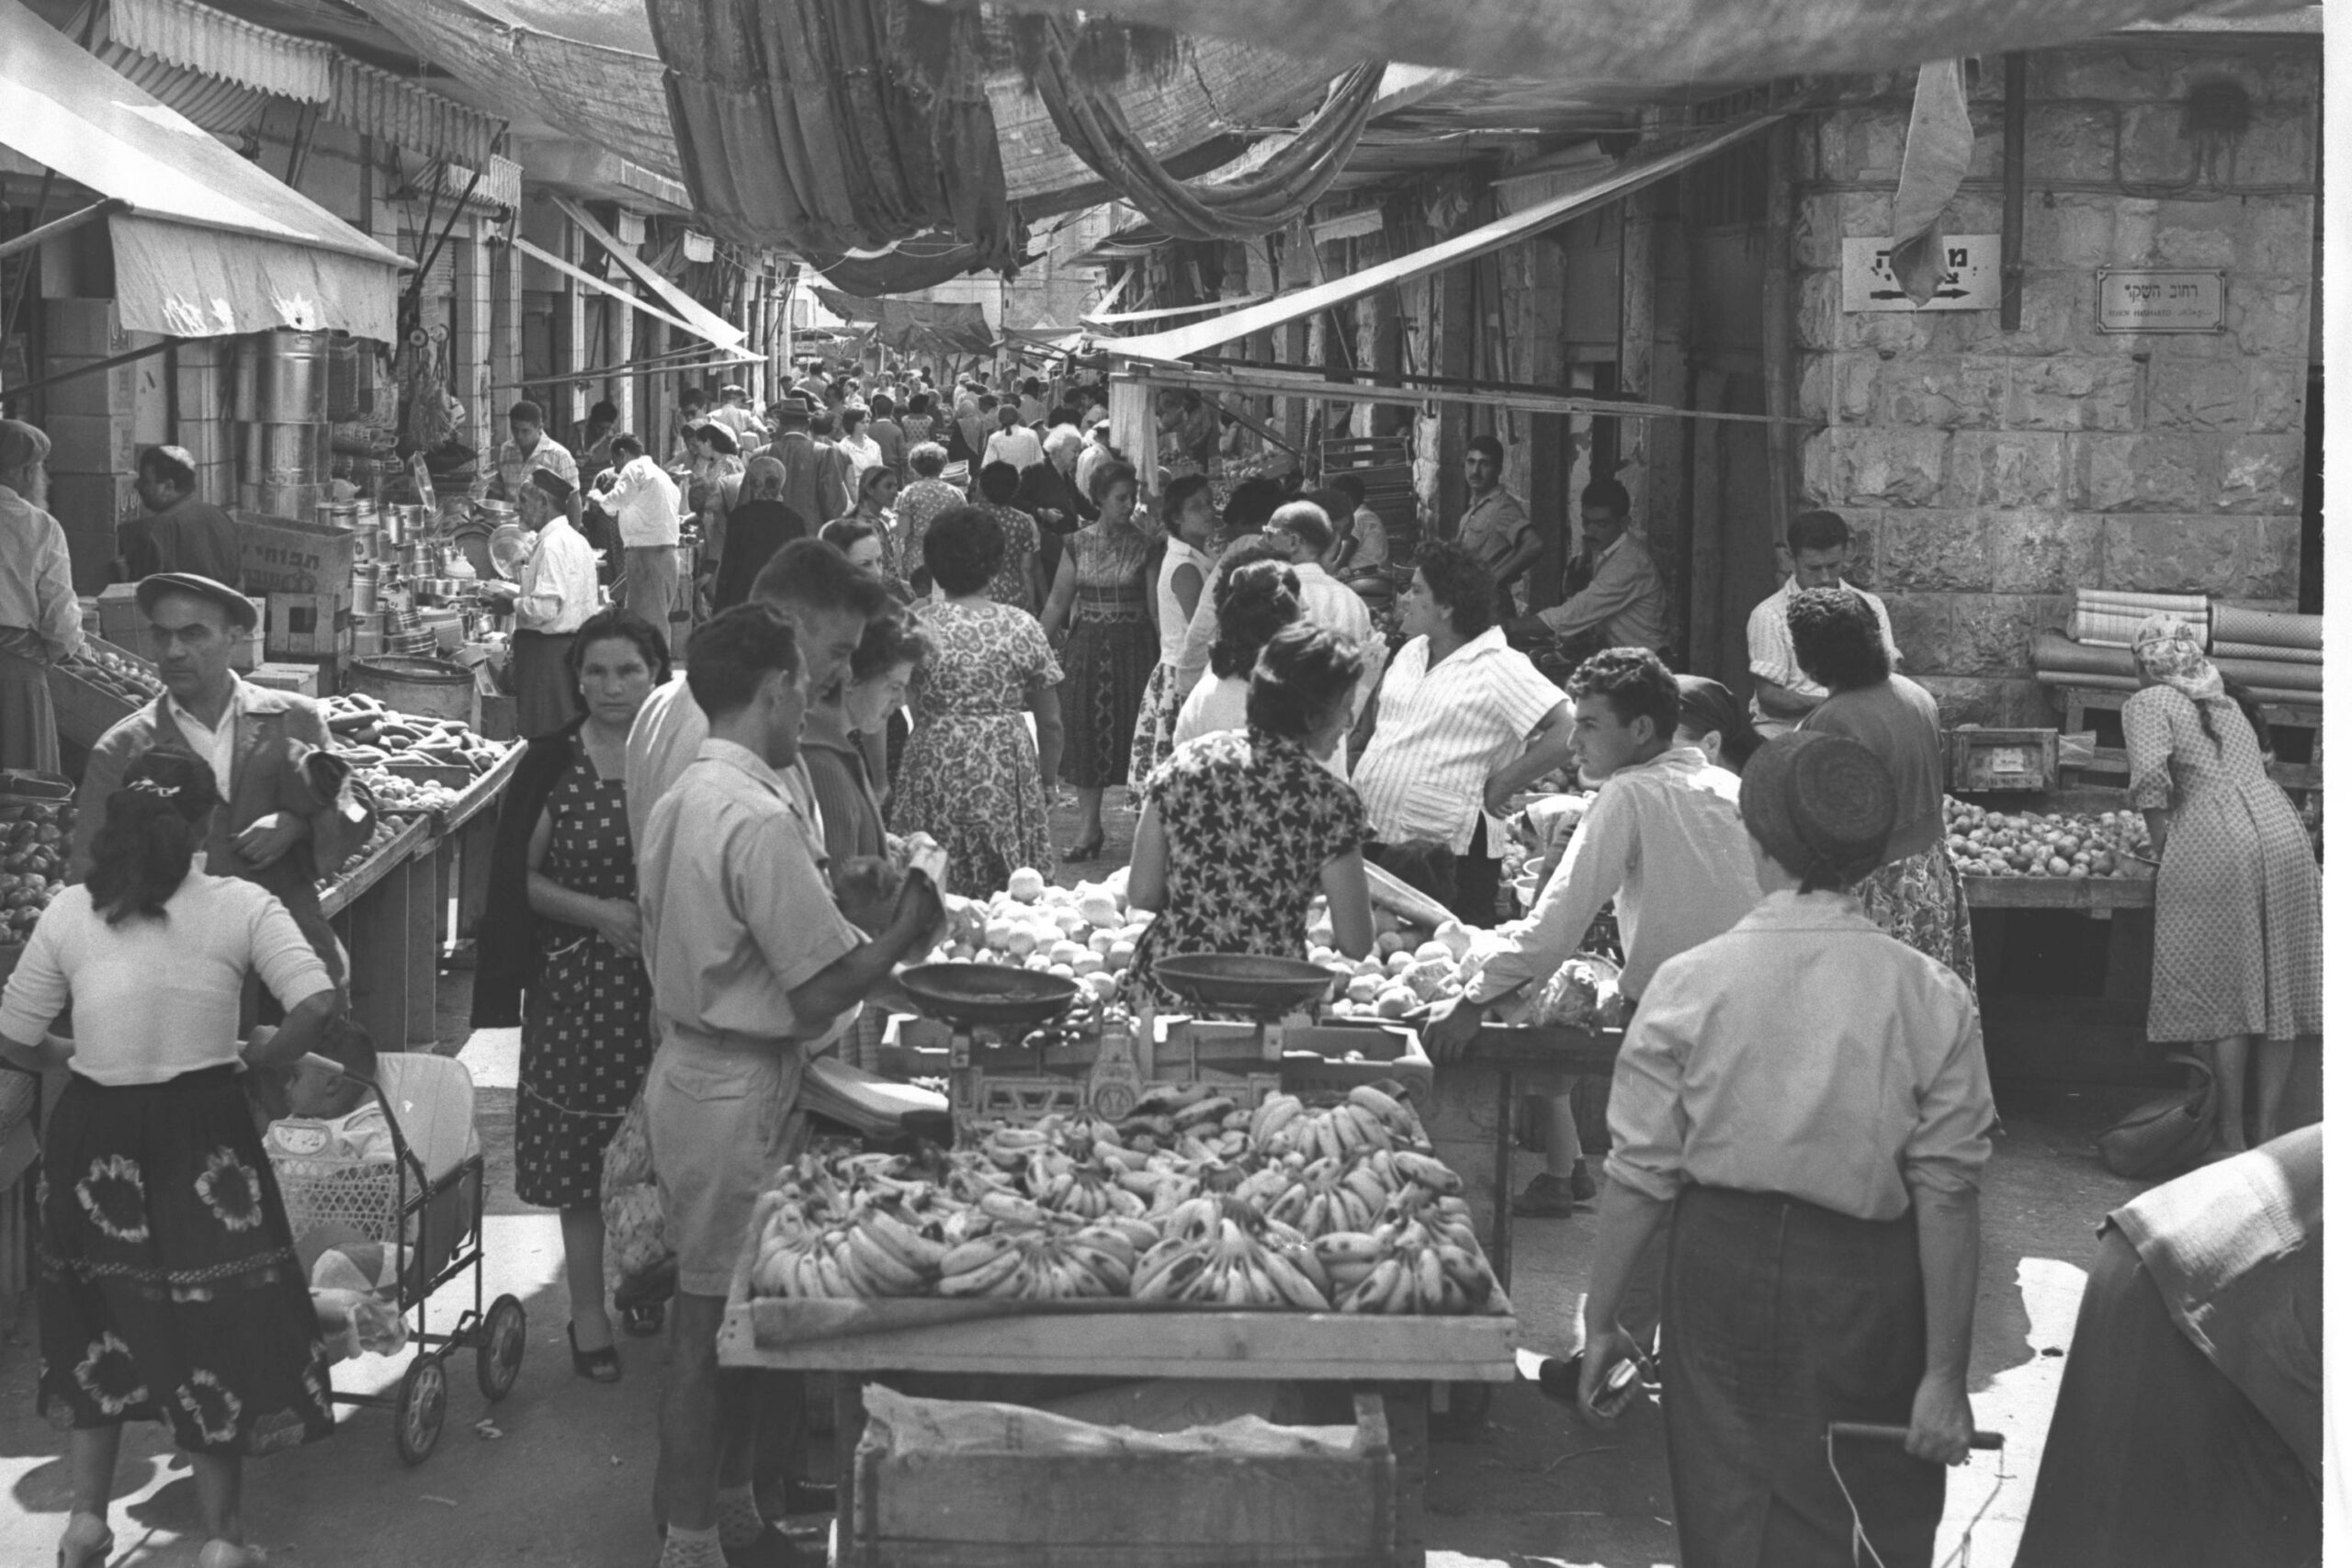 Jerusalem's machaneh yehudah market filled with shoppers in the 1960s